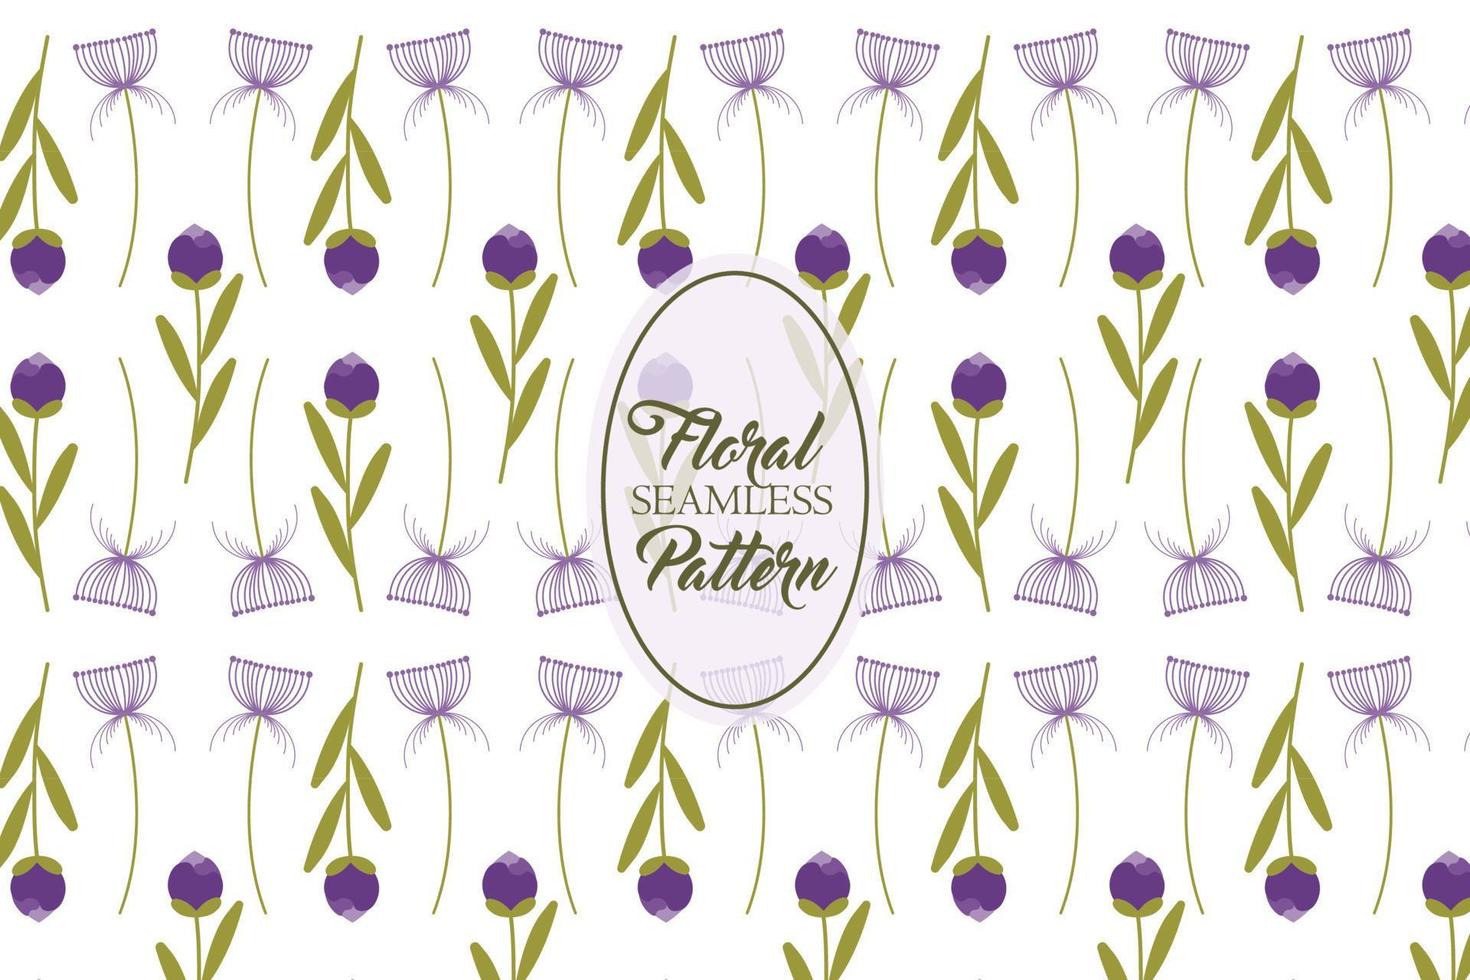 Wishing flower dandelion and tulip buds purple floral abstract vector seamless repeat pattern